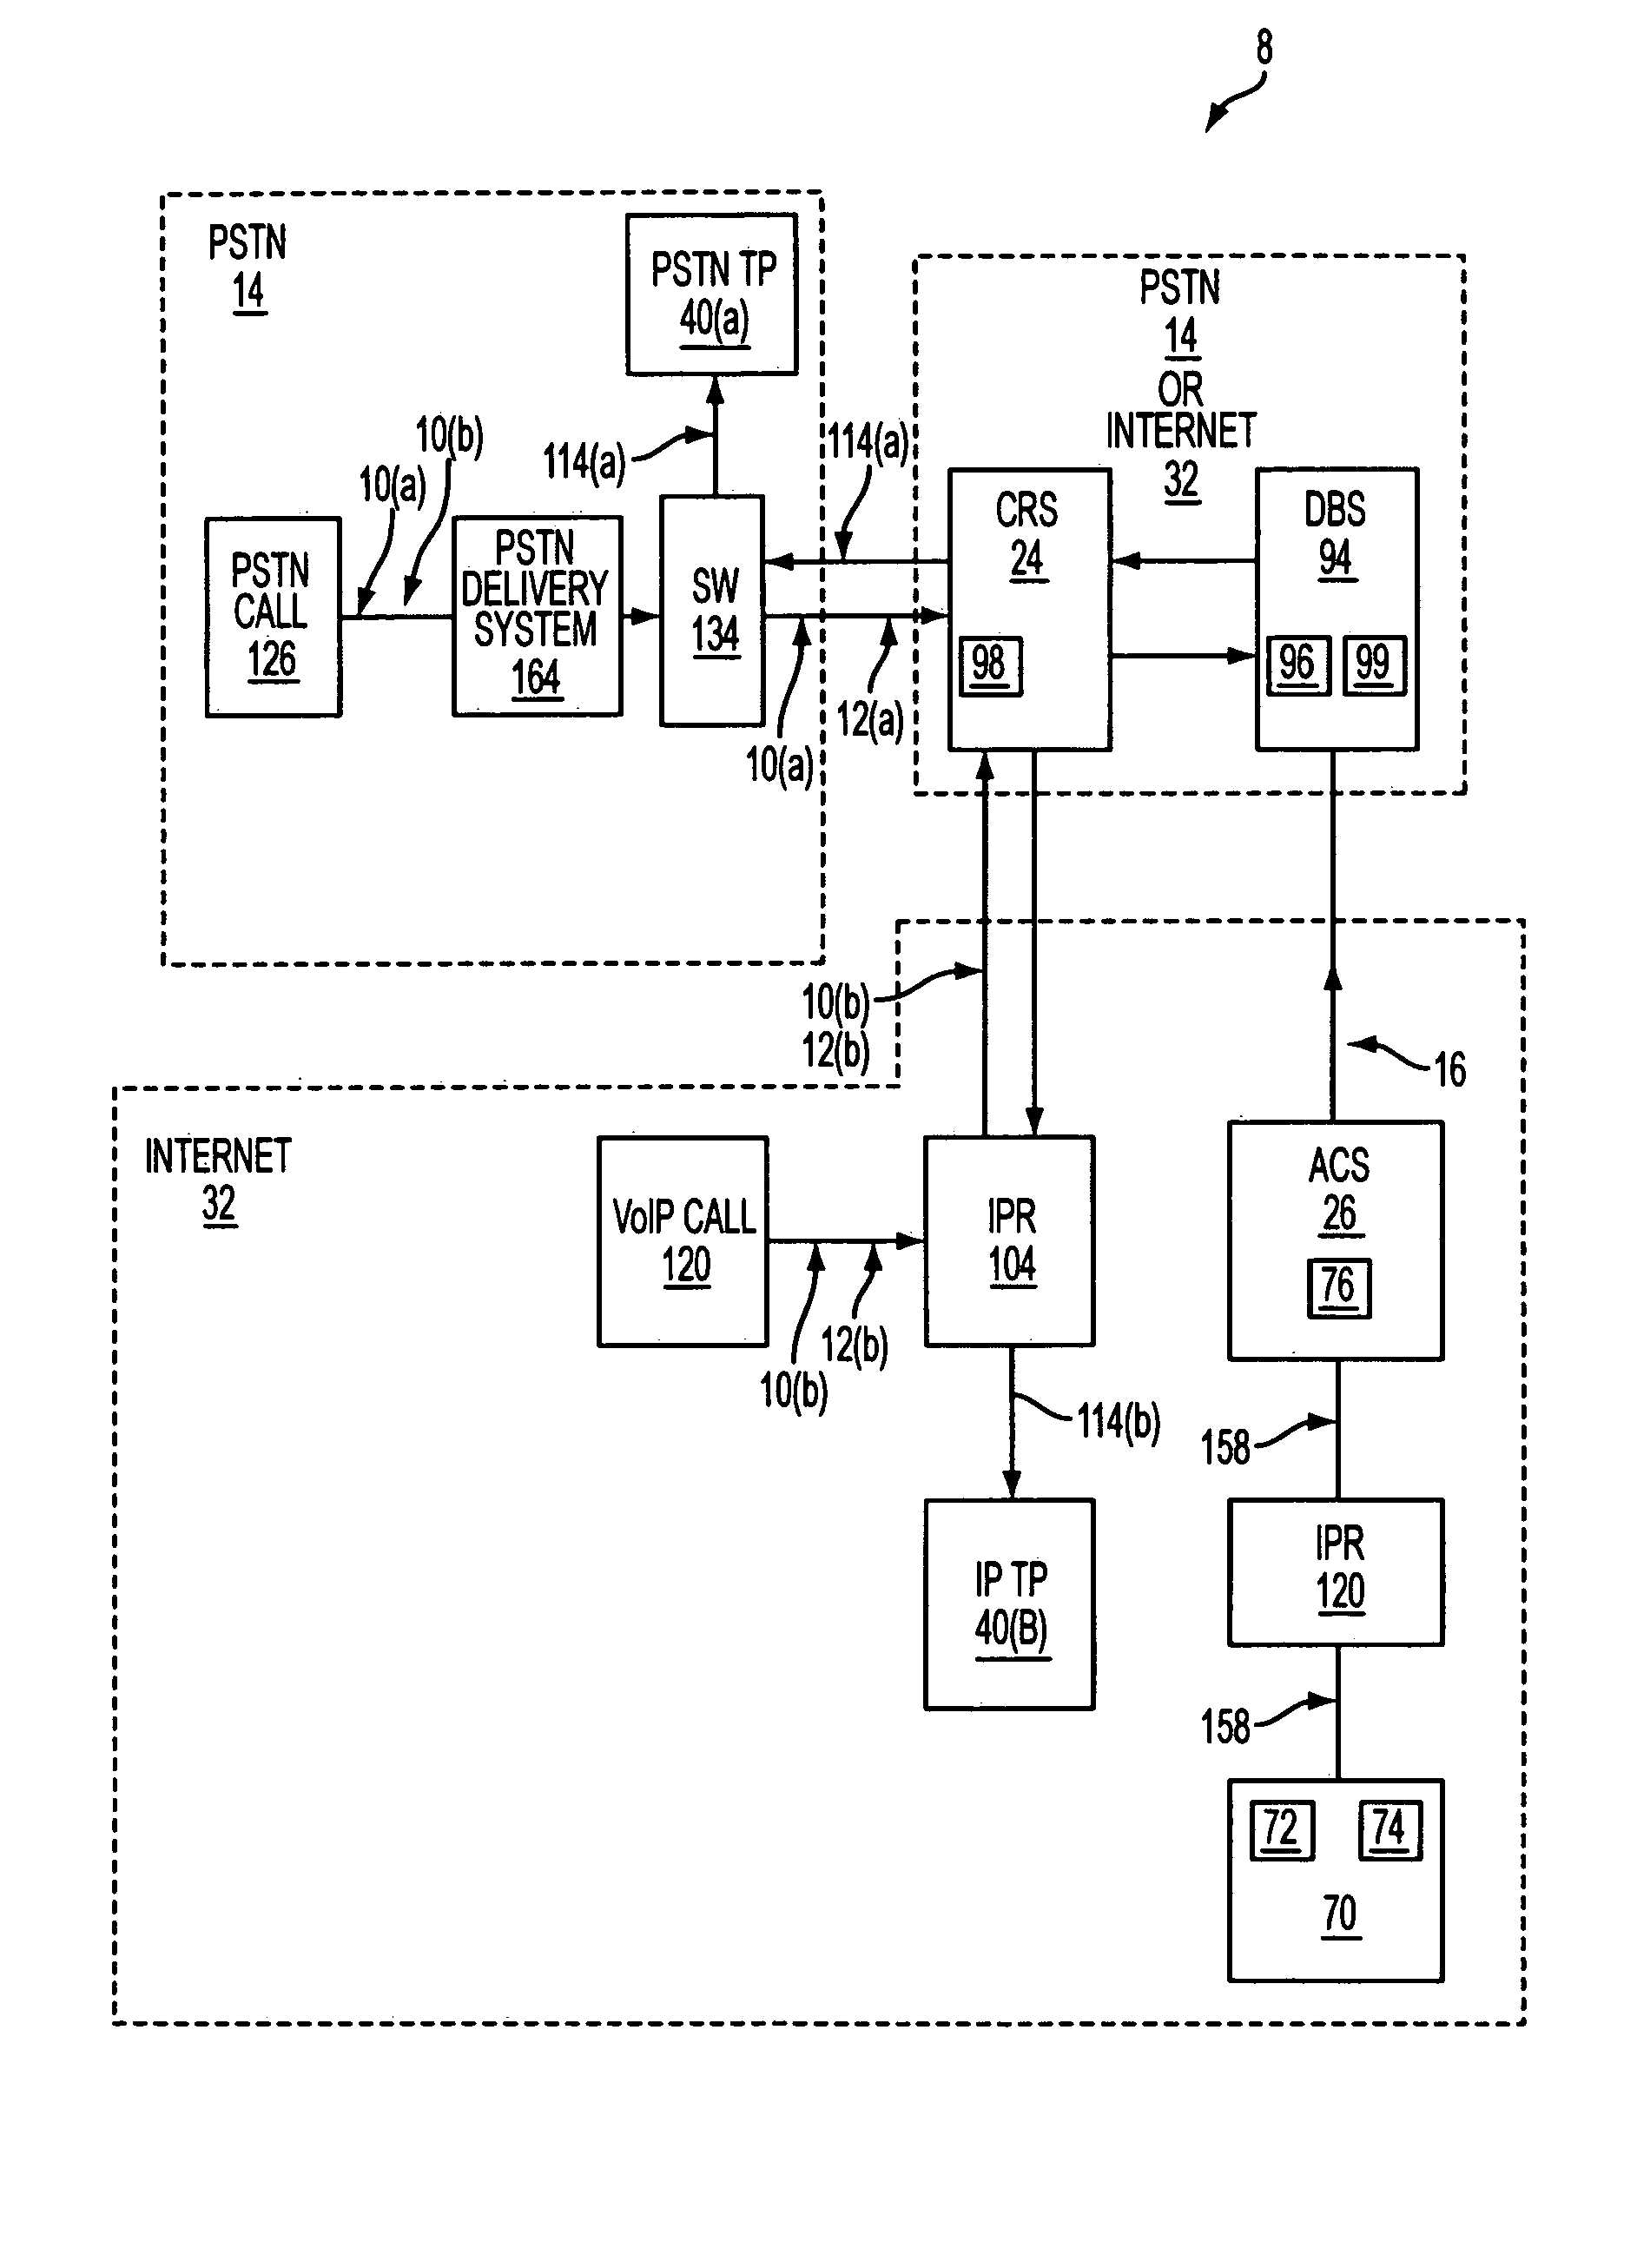 Method for public access to private phone numbers and other telephonic peripherals using a caller access code